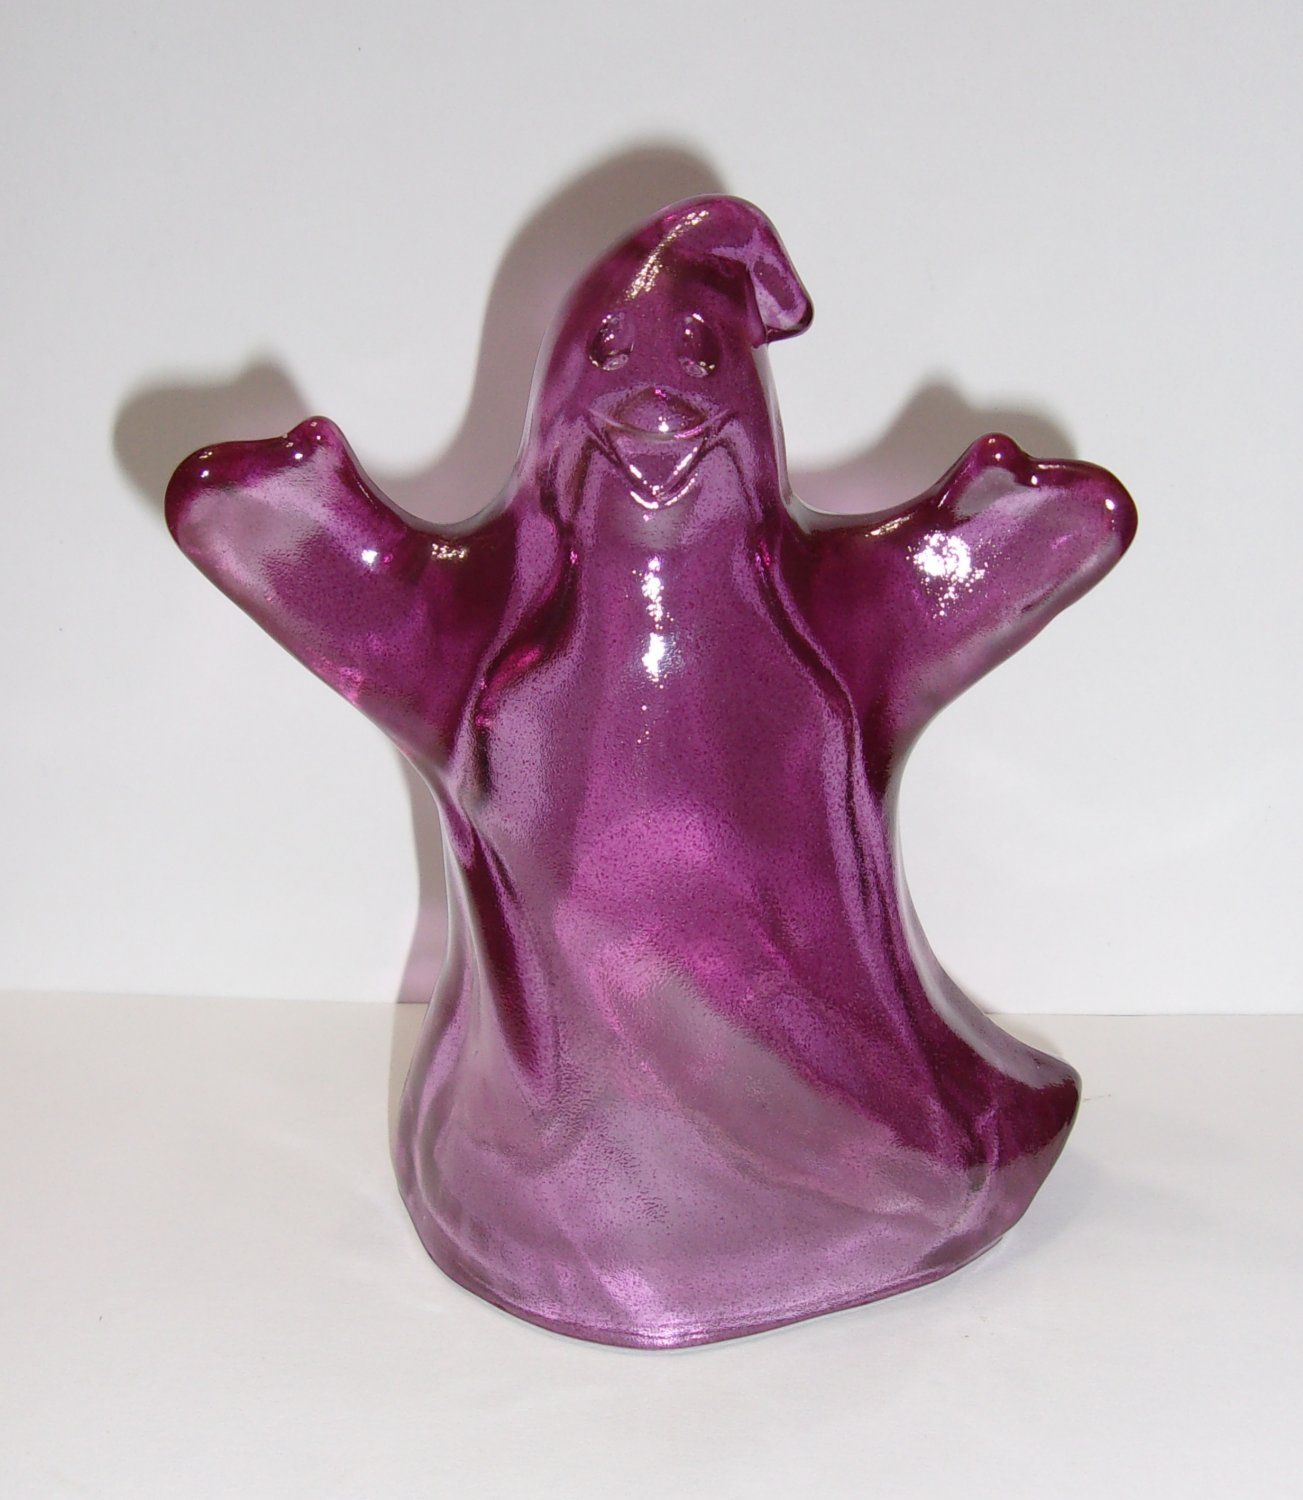 Fenton Glass Cranberry Airbrushed Halloween Ghost Figurine by Mosser Glass USA